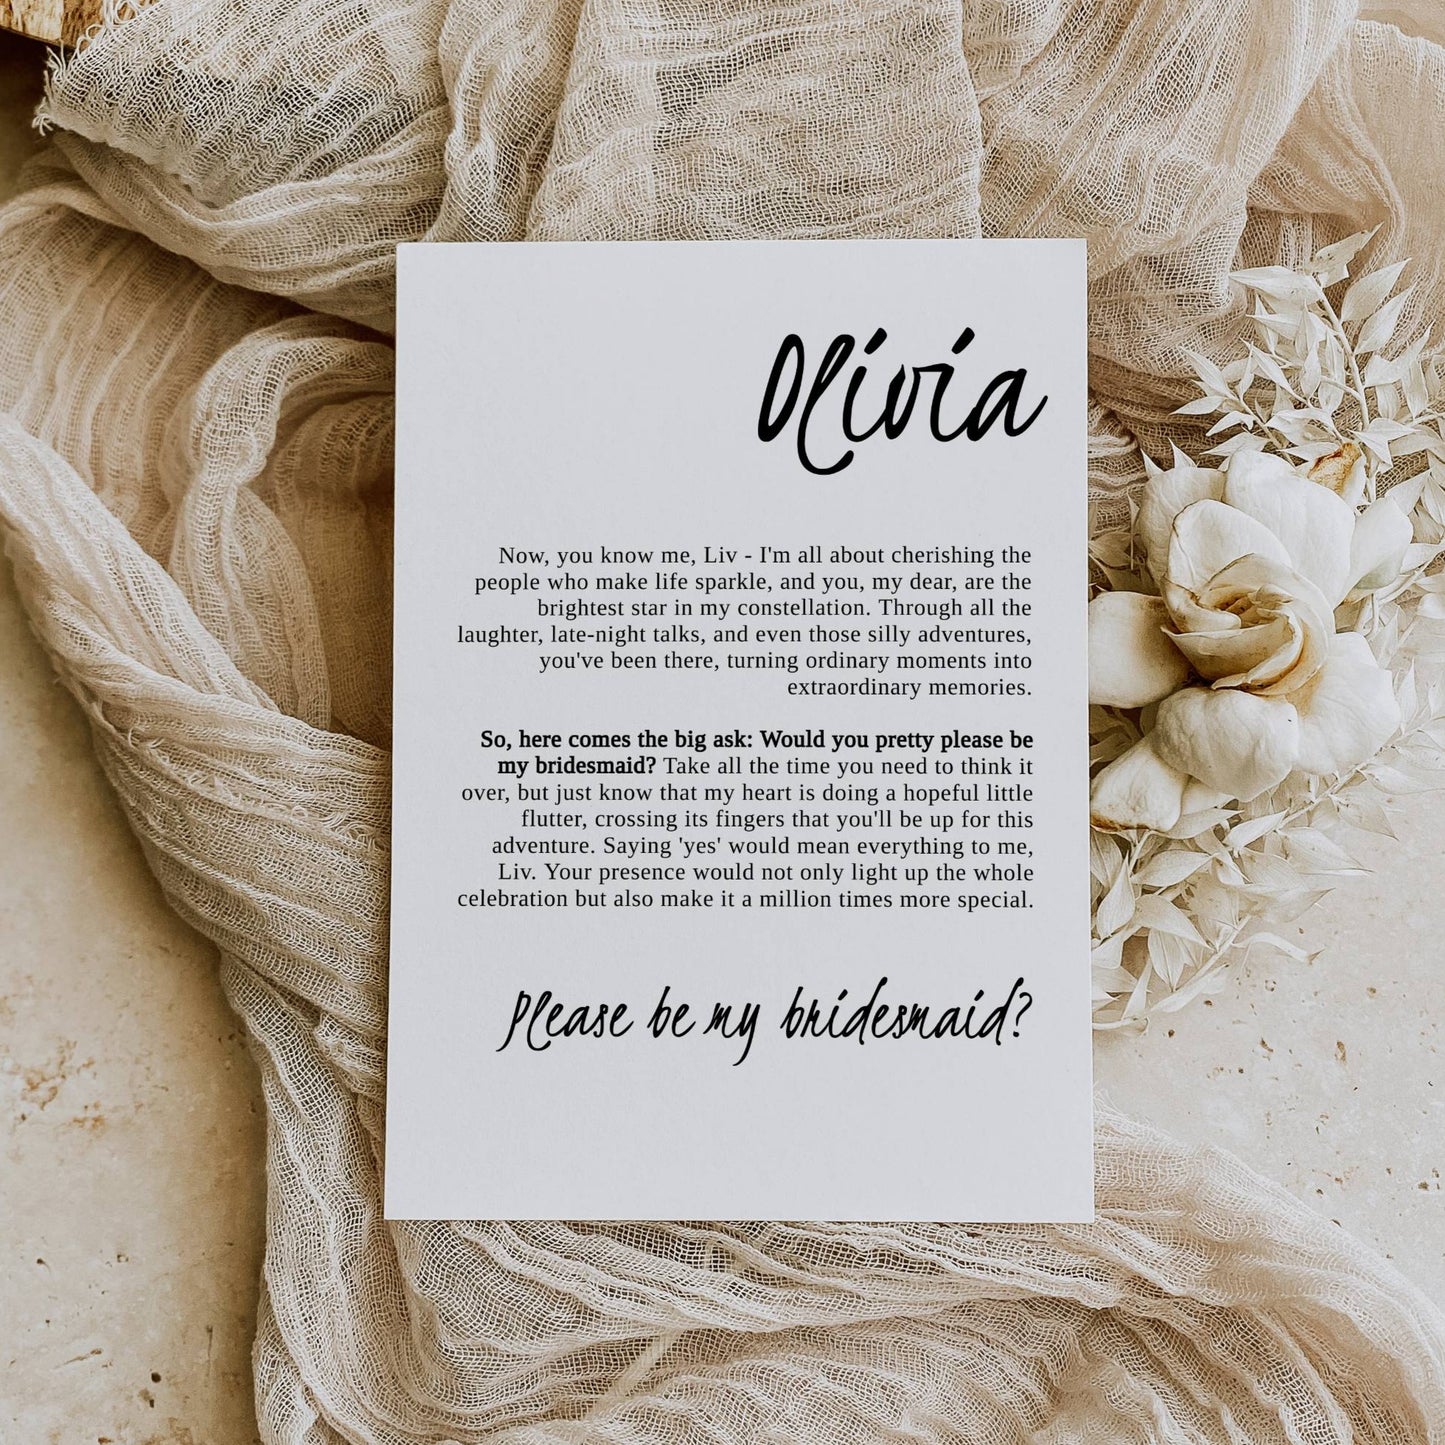 Bridesmaid Proposal Card Template, Editable Photo Proposal Card, Will You Be My Maid of Honor Card, Bridesmaid Card Template, Ask Card